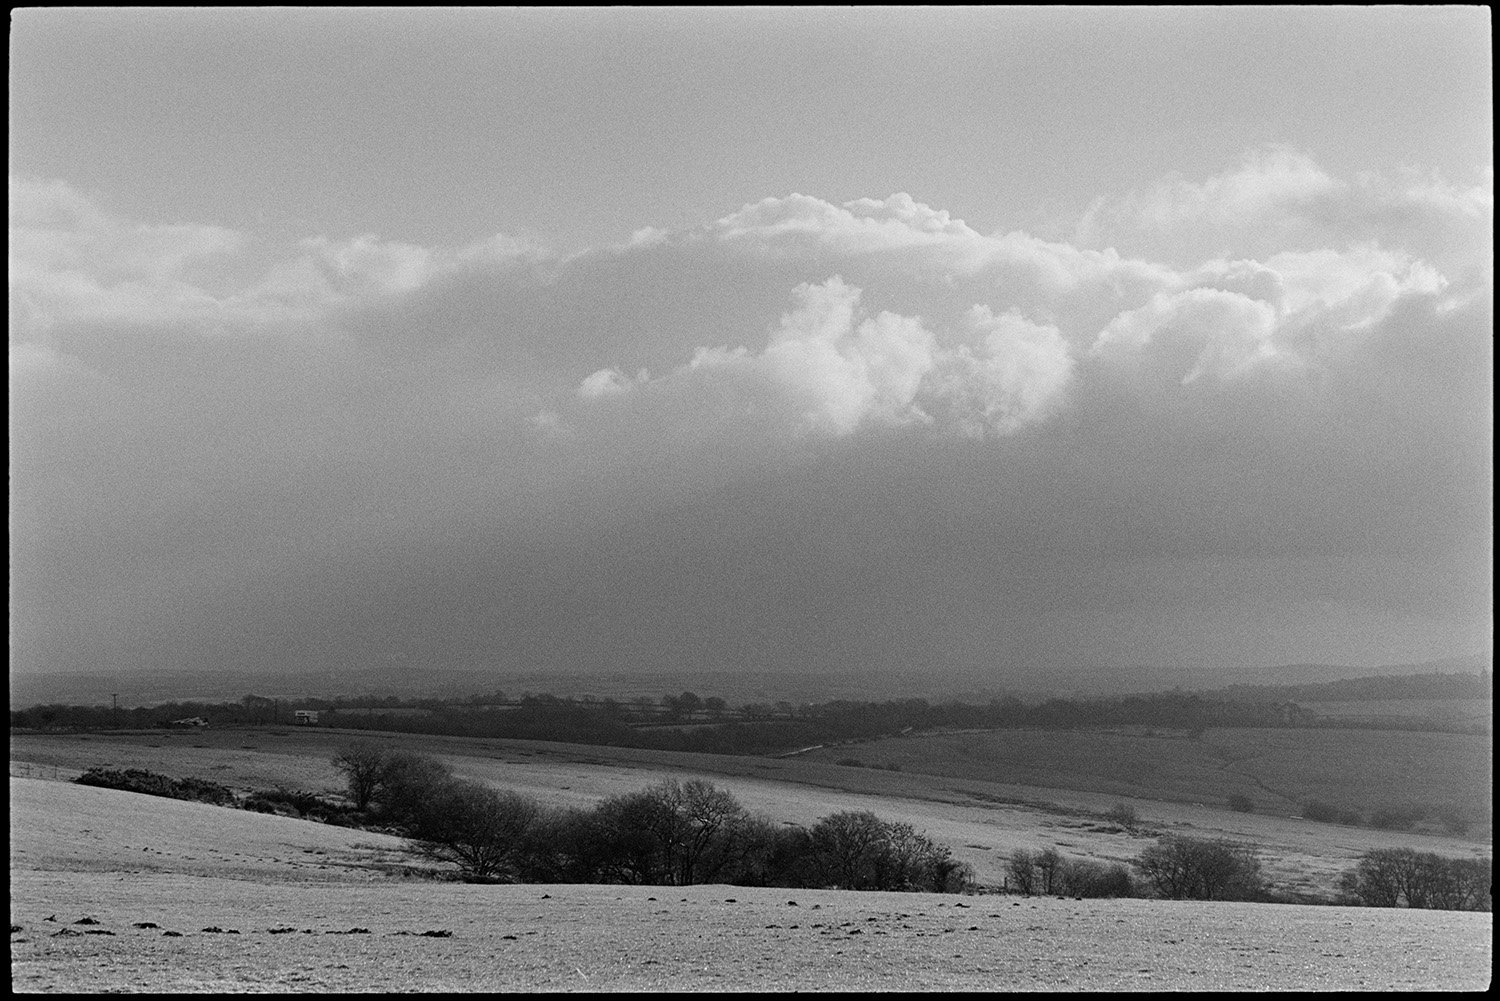 Cloudy views across moor couple walking with pram. 
[A landscape of fields and bushes on Hatherleigh Moor, with clouds in the sky above.]